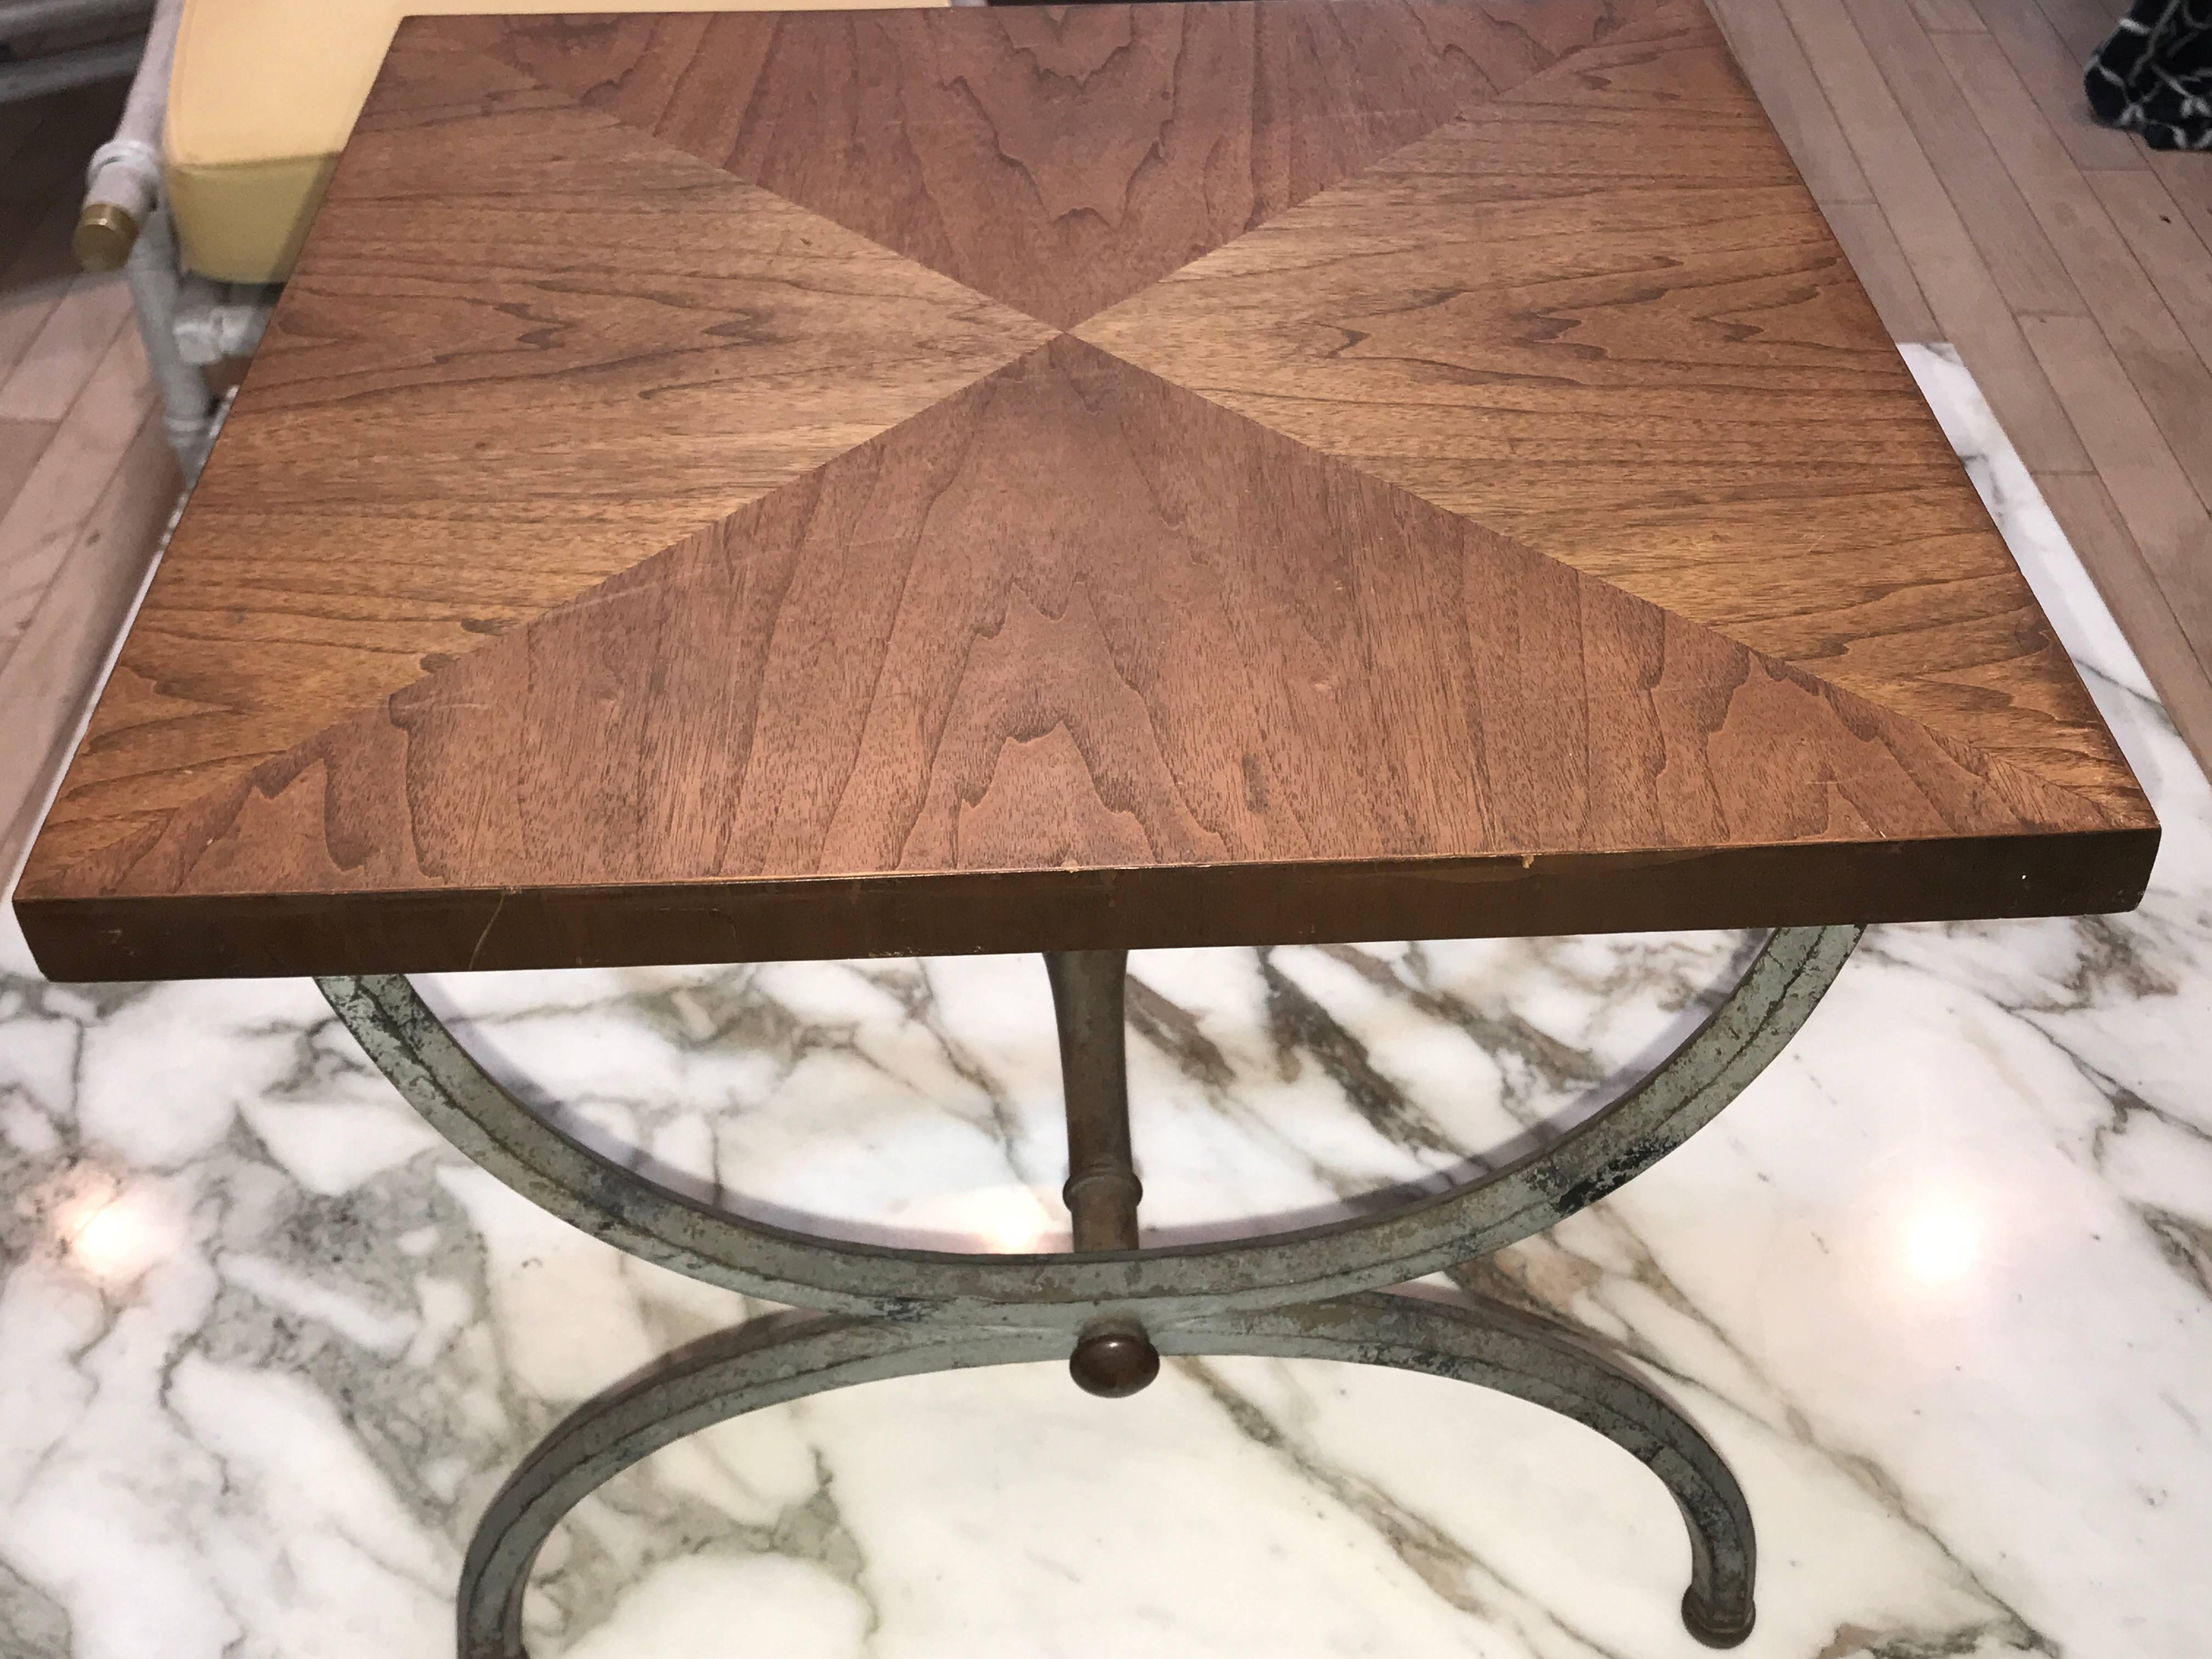 Pair of elegant classic pavane forged iron parquetry side tables. Original grey patina on the iron legs.